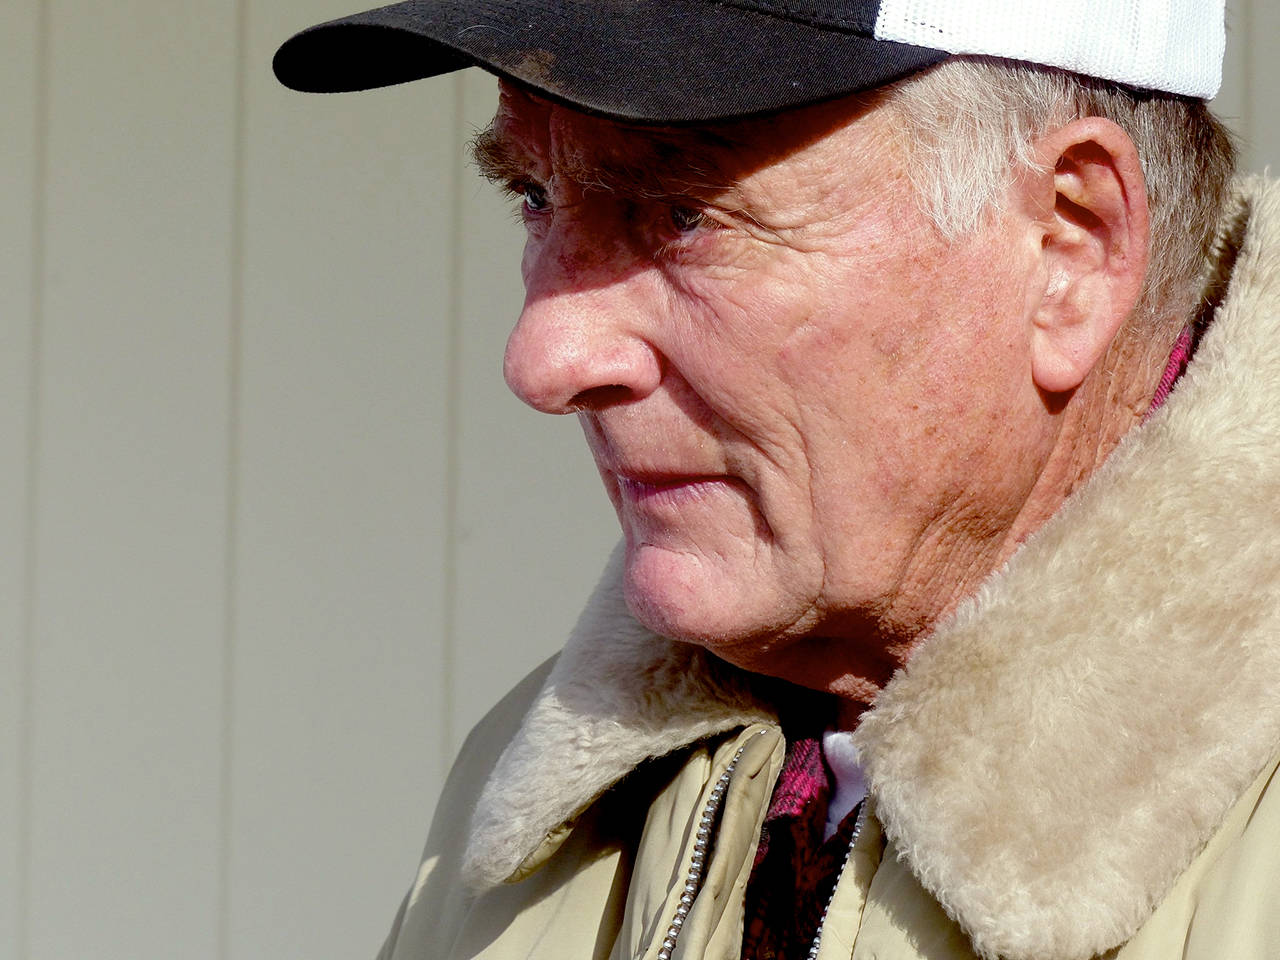 In this Jan. 2016 photo, rancher Dwight Hammond Jr. greets protesters outside his home in Burns, Oregon. President Donald Trump has pardoned Dwight and Steven Hammond, two ranchers whose case sparked the armed occupation of a national wildlife refuge in Oregon. (Les Zaitz/The Oregonian via AP, File)